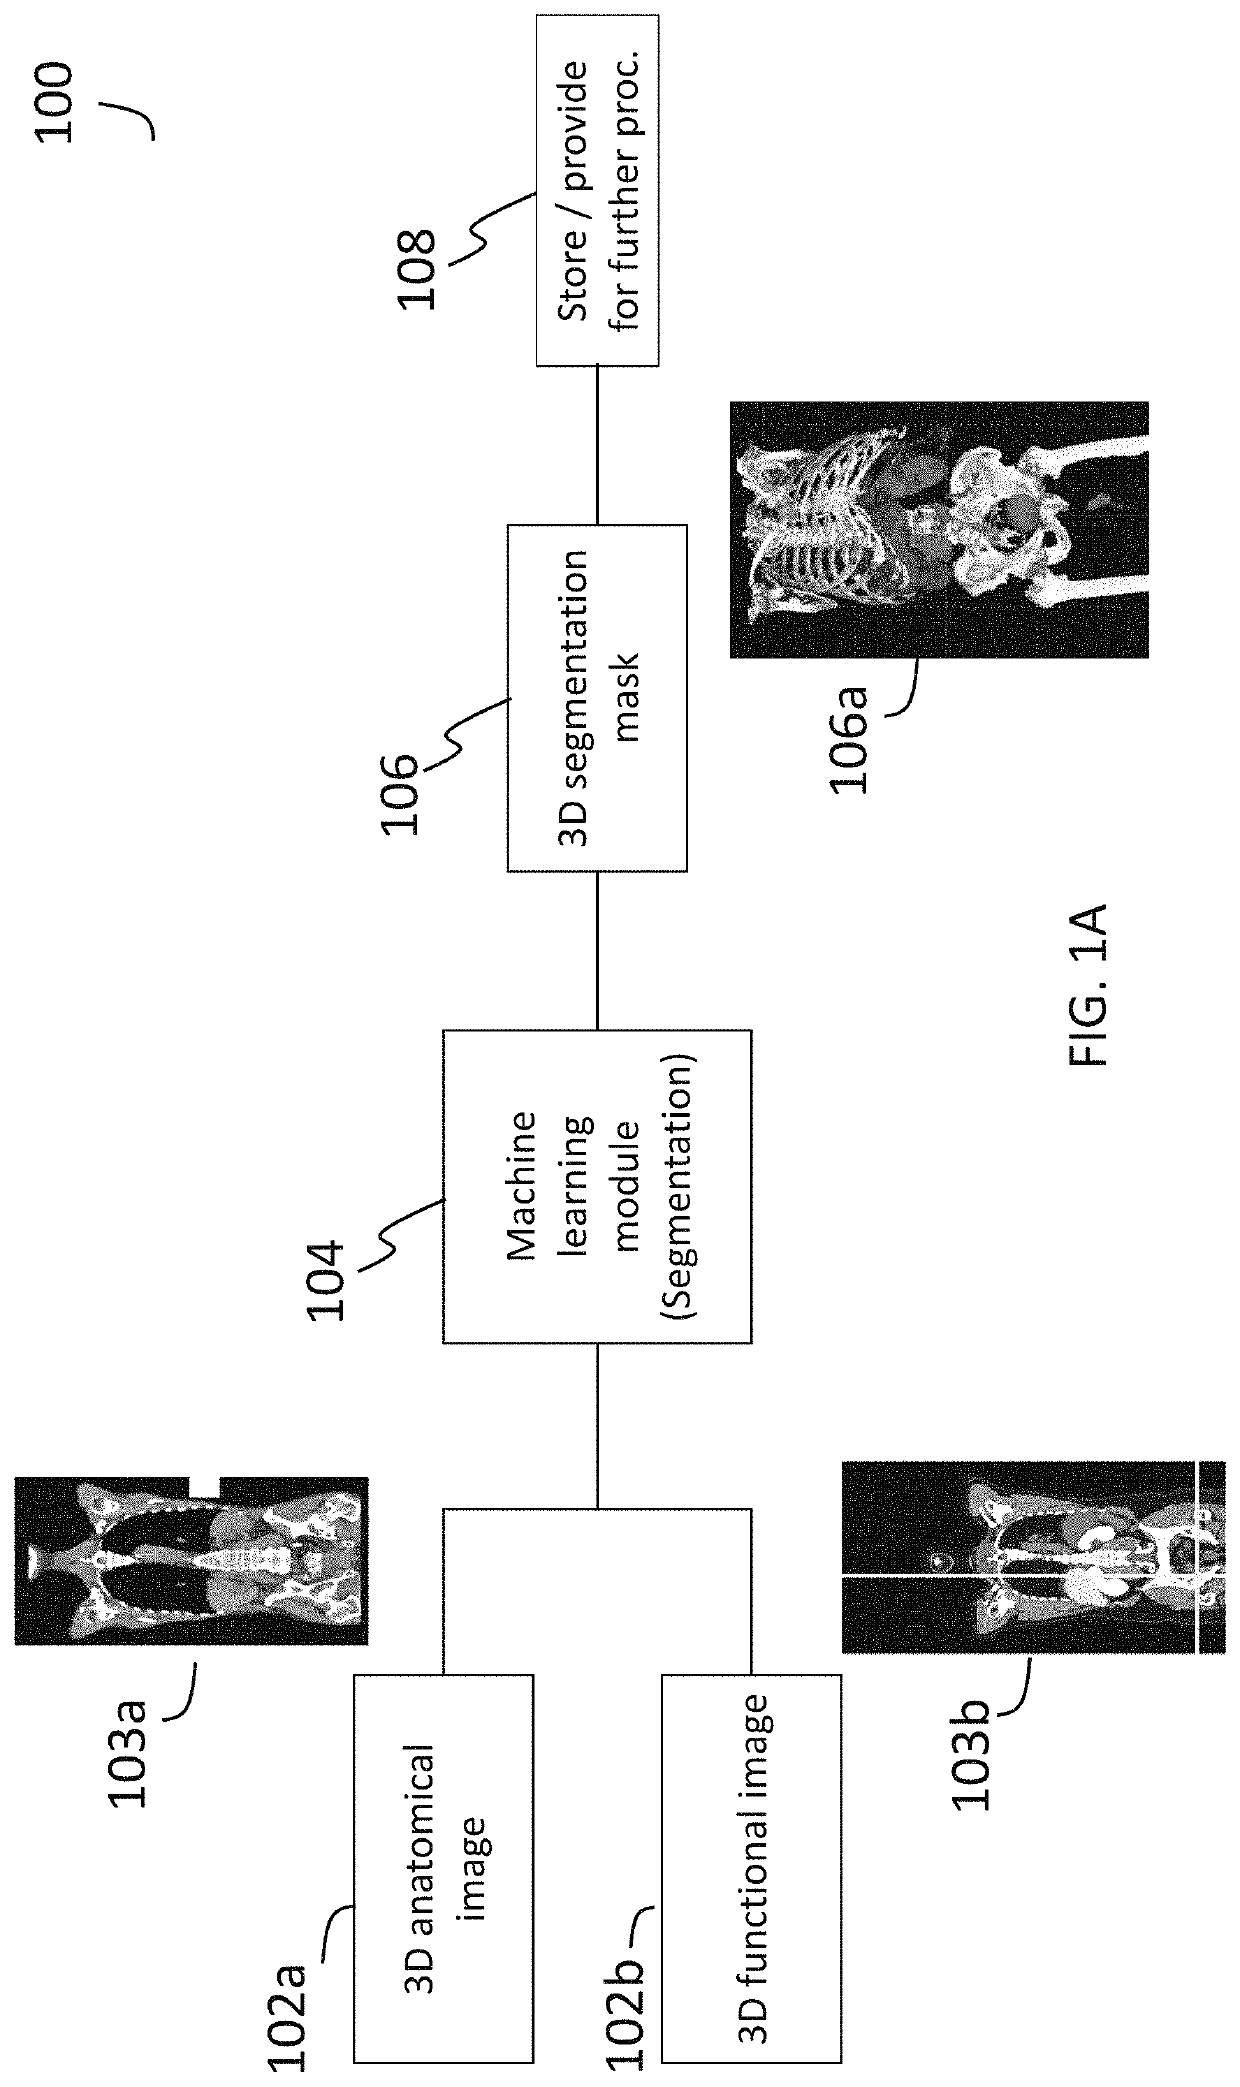 Systems and methods for deep-learning-based segmentation of composite images